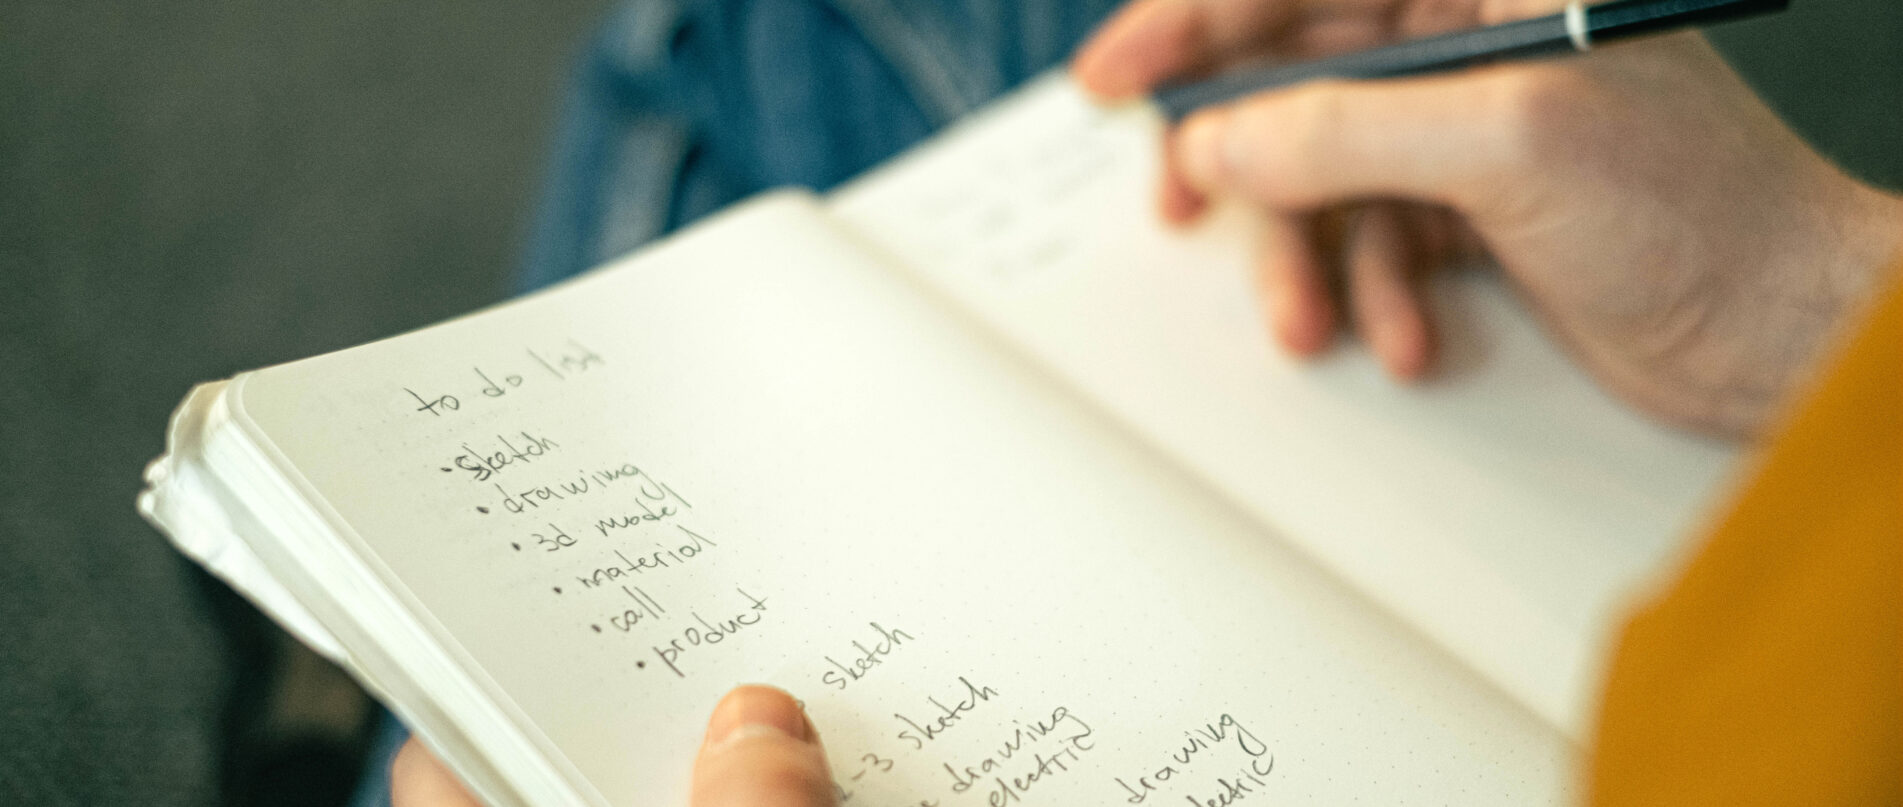 header image of a person writing in a notebook their likes and dislikes